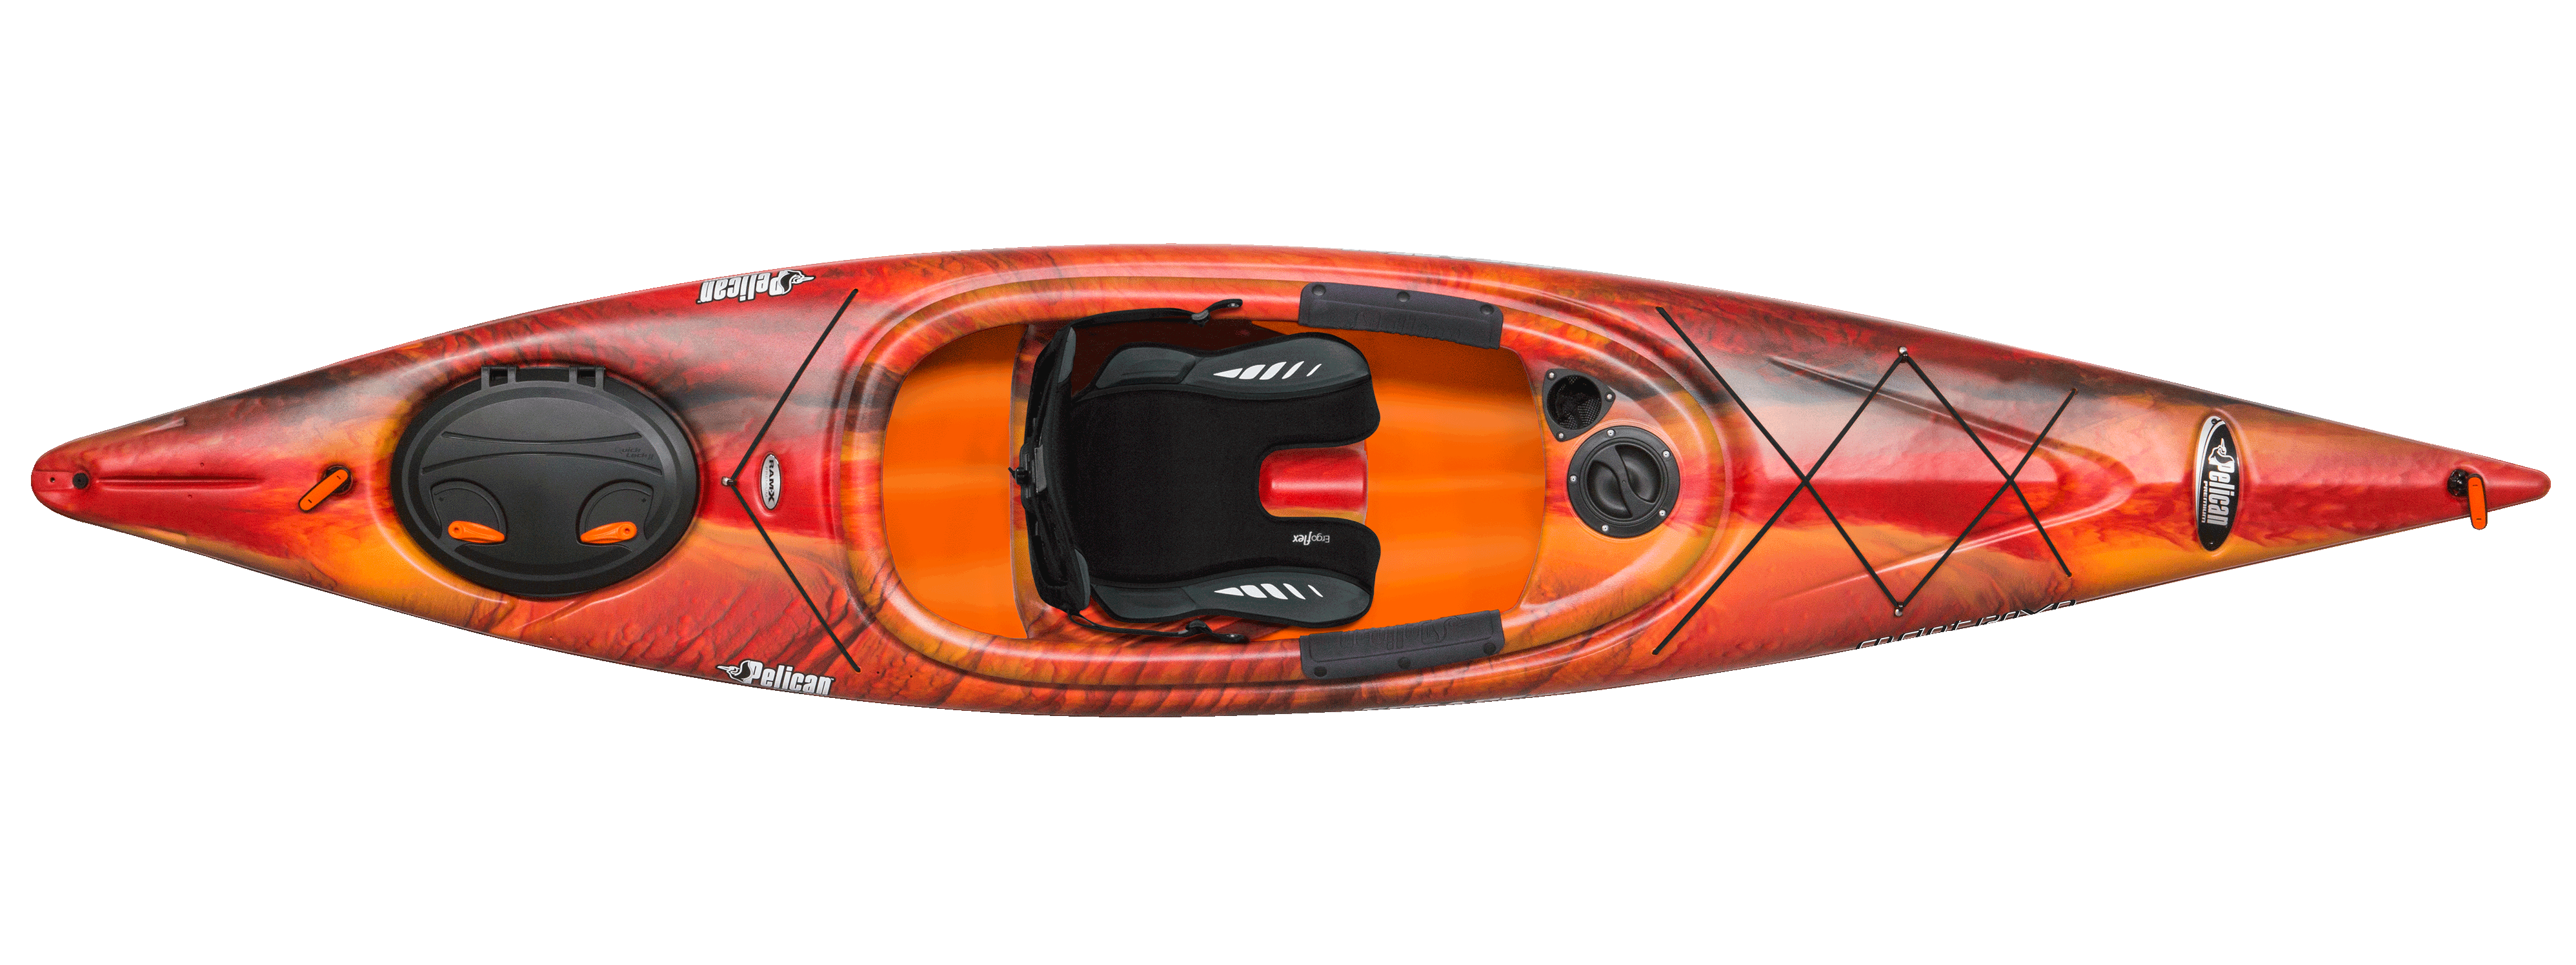 Paddling Equipment - Kayaks, Canoes, Rafts, Paddleboards & Gear [Paddling  Buyer's Guide]